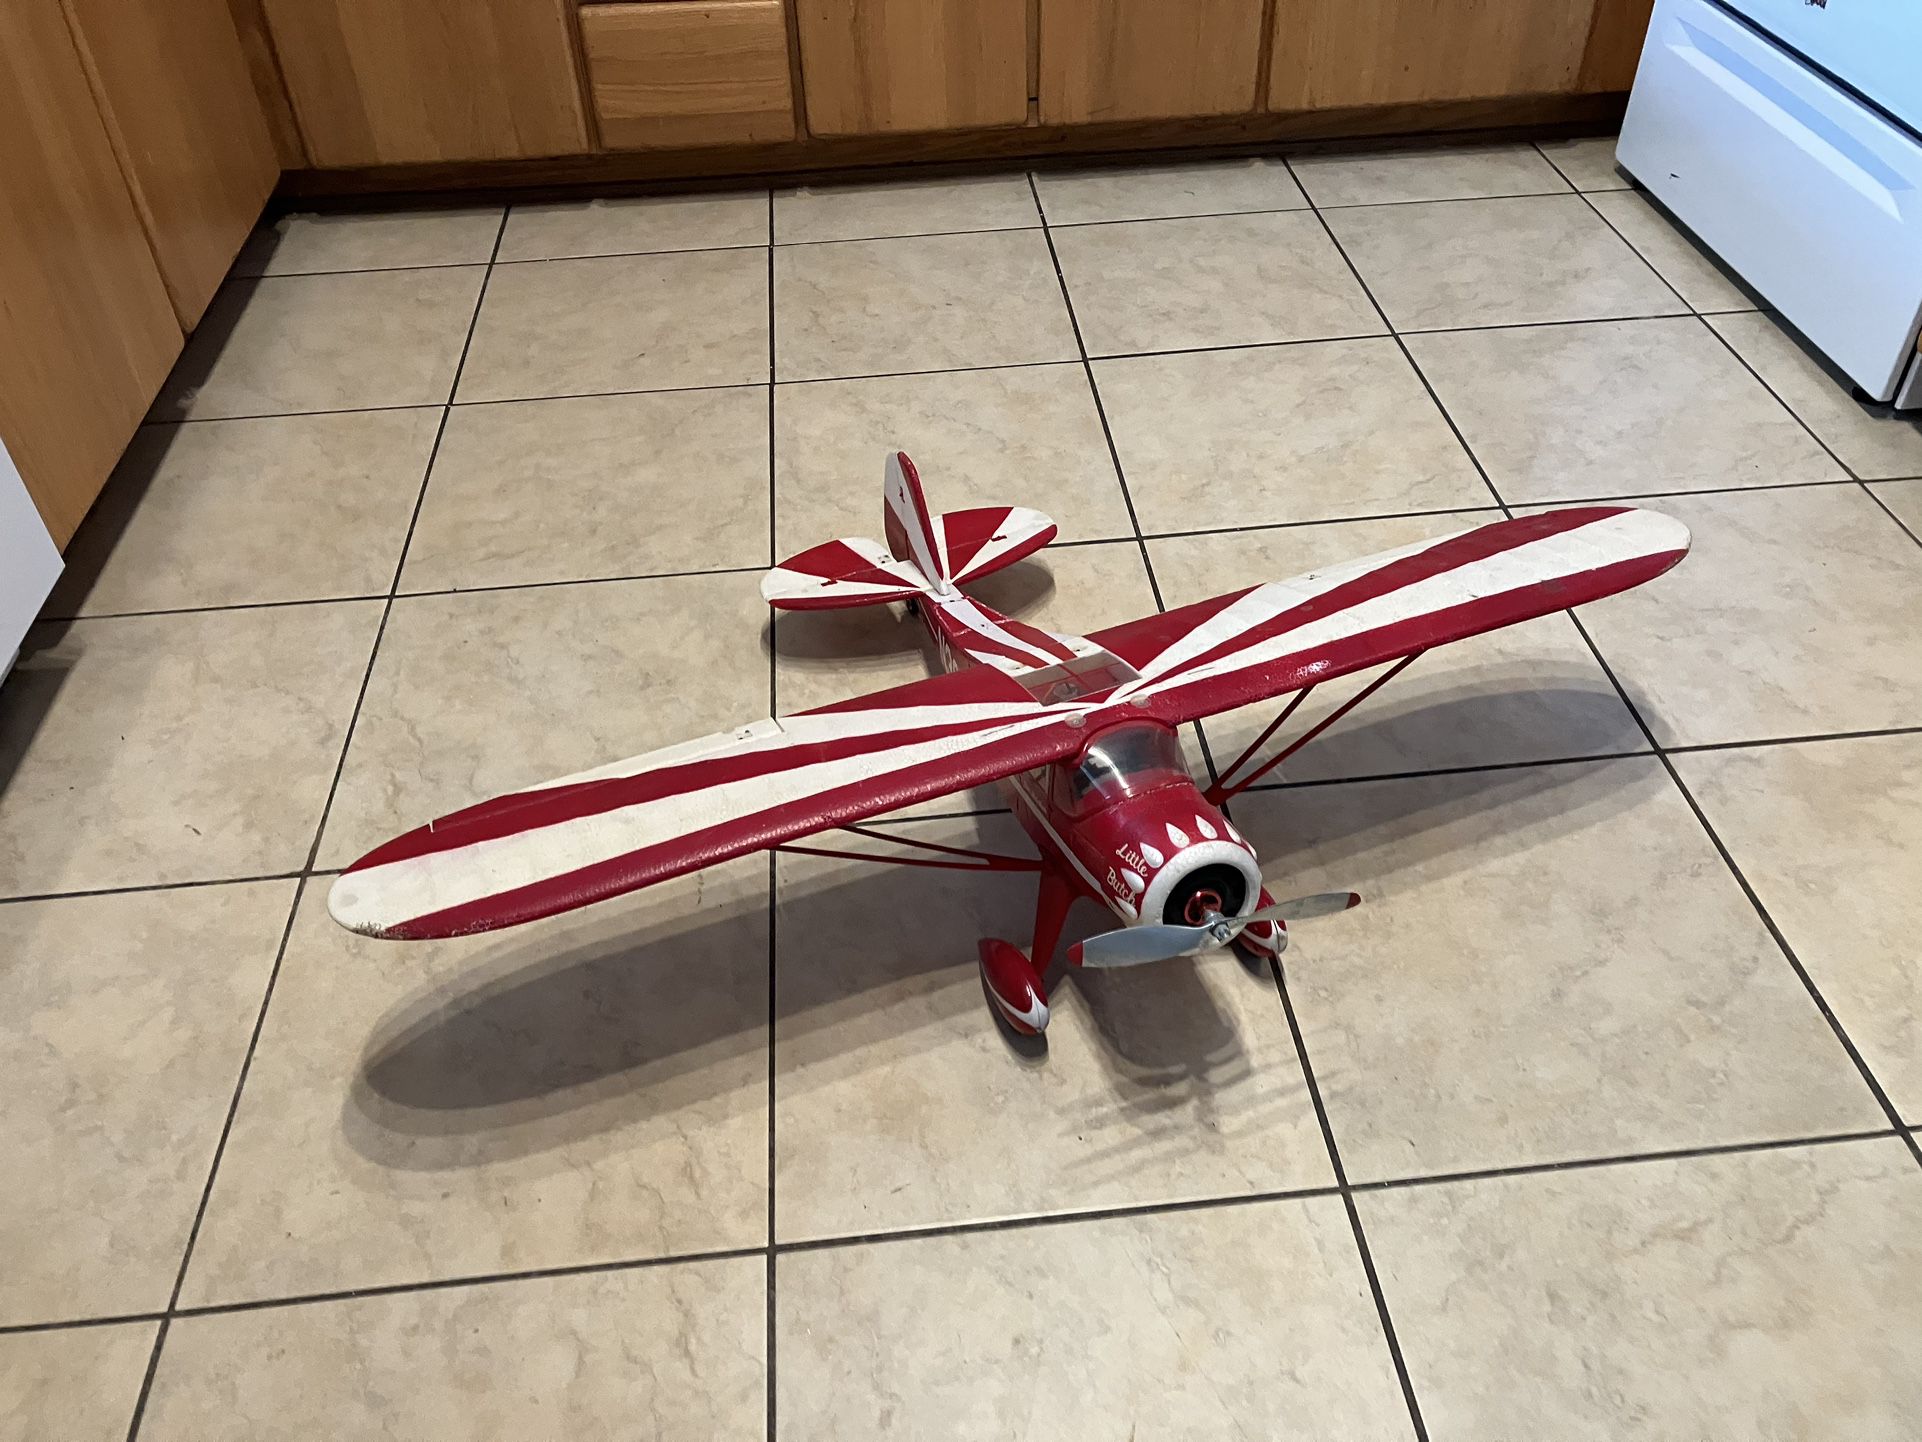 Durafly Monocoupe 1100mm Rc Airplane